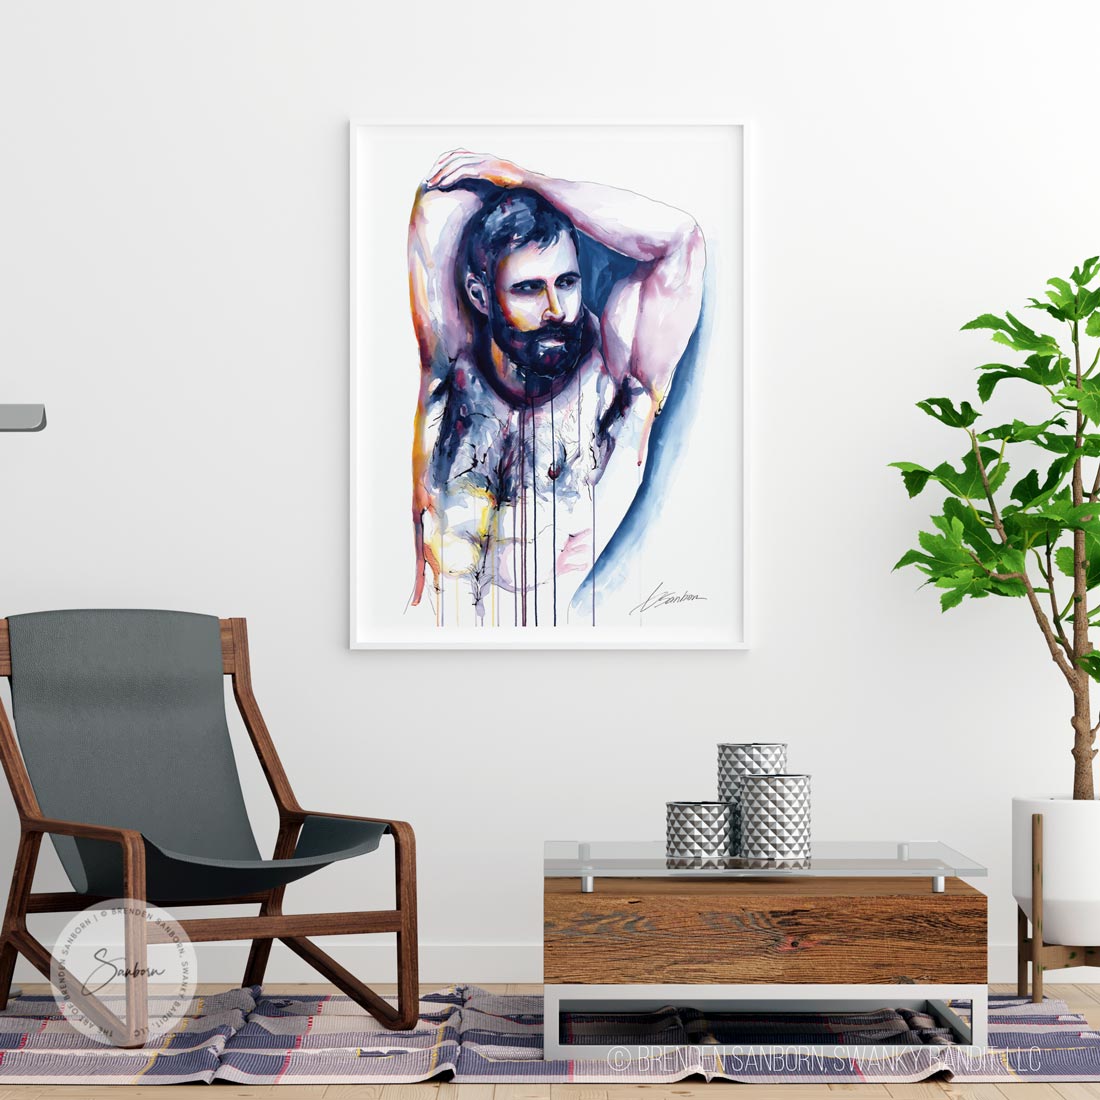 Muscular Hairy Chested Bearded Man with Deep Gaze and Flowing Colors - Giclee Art Print